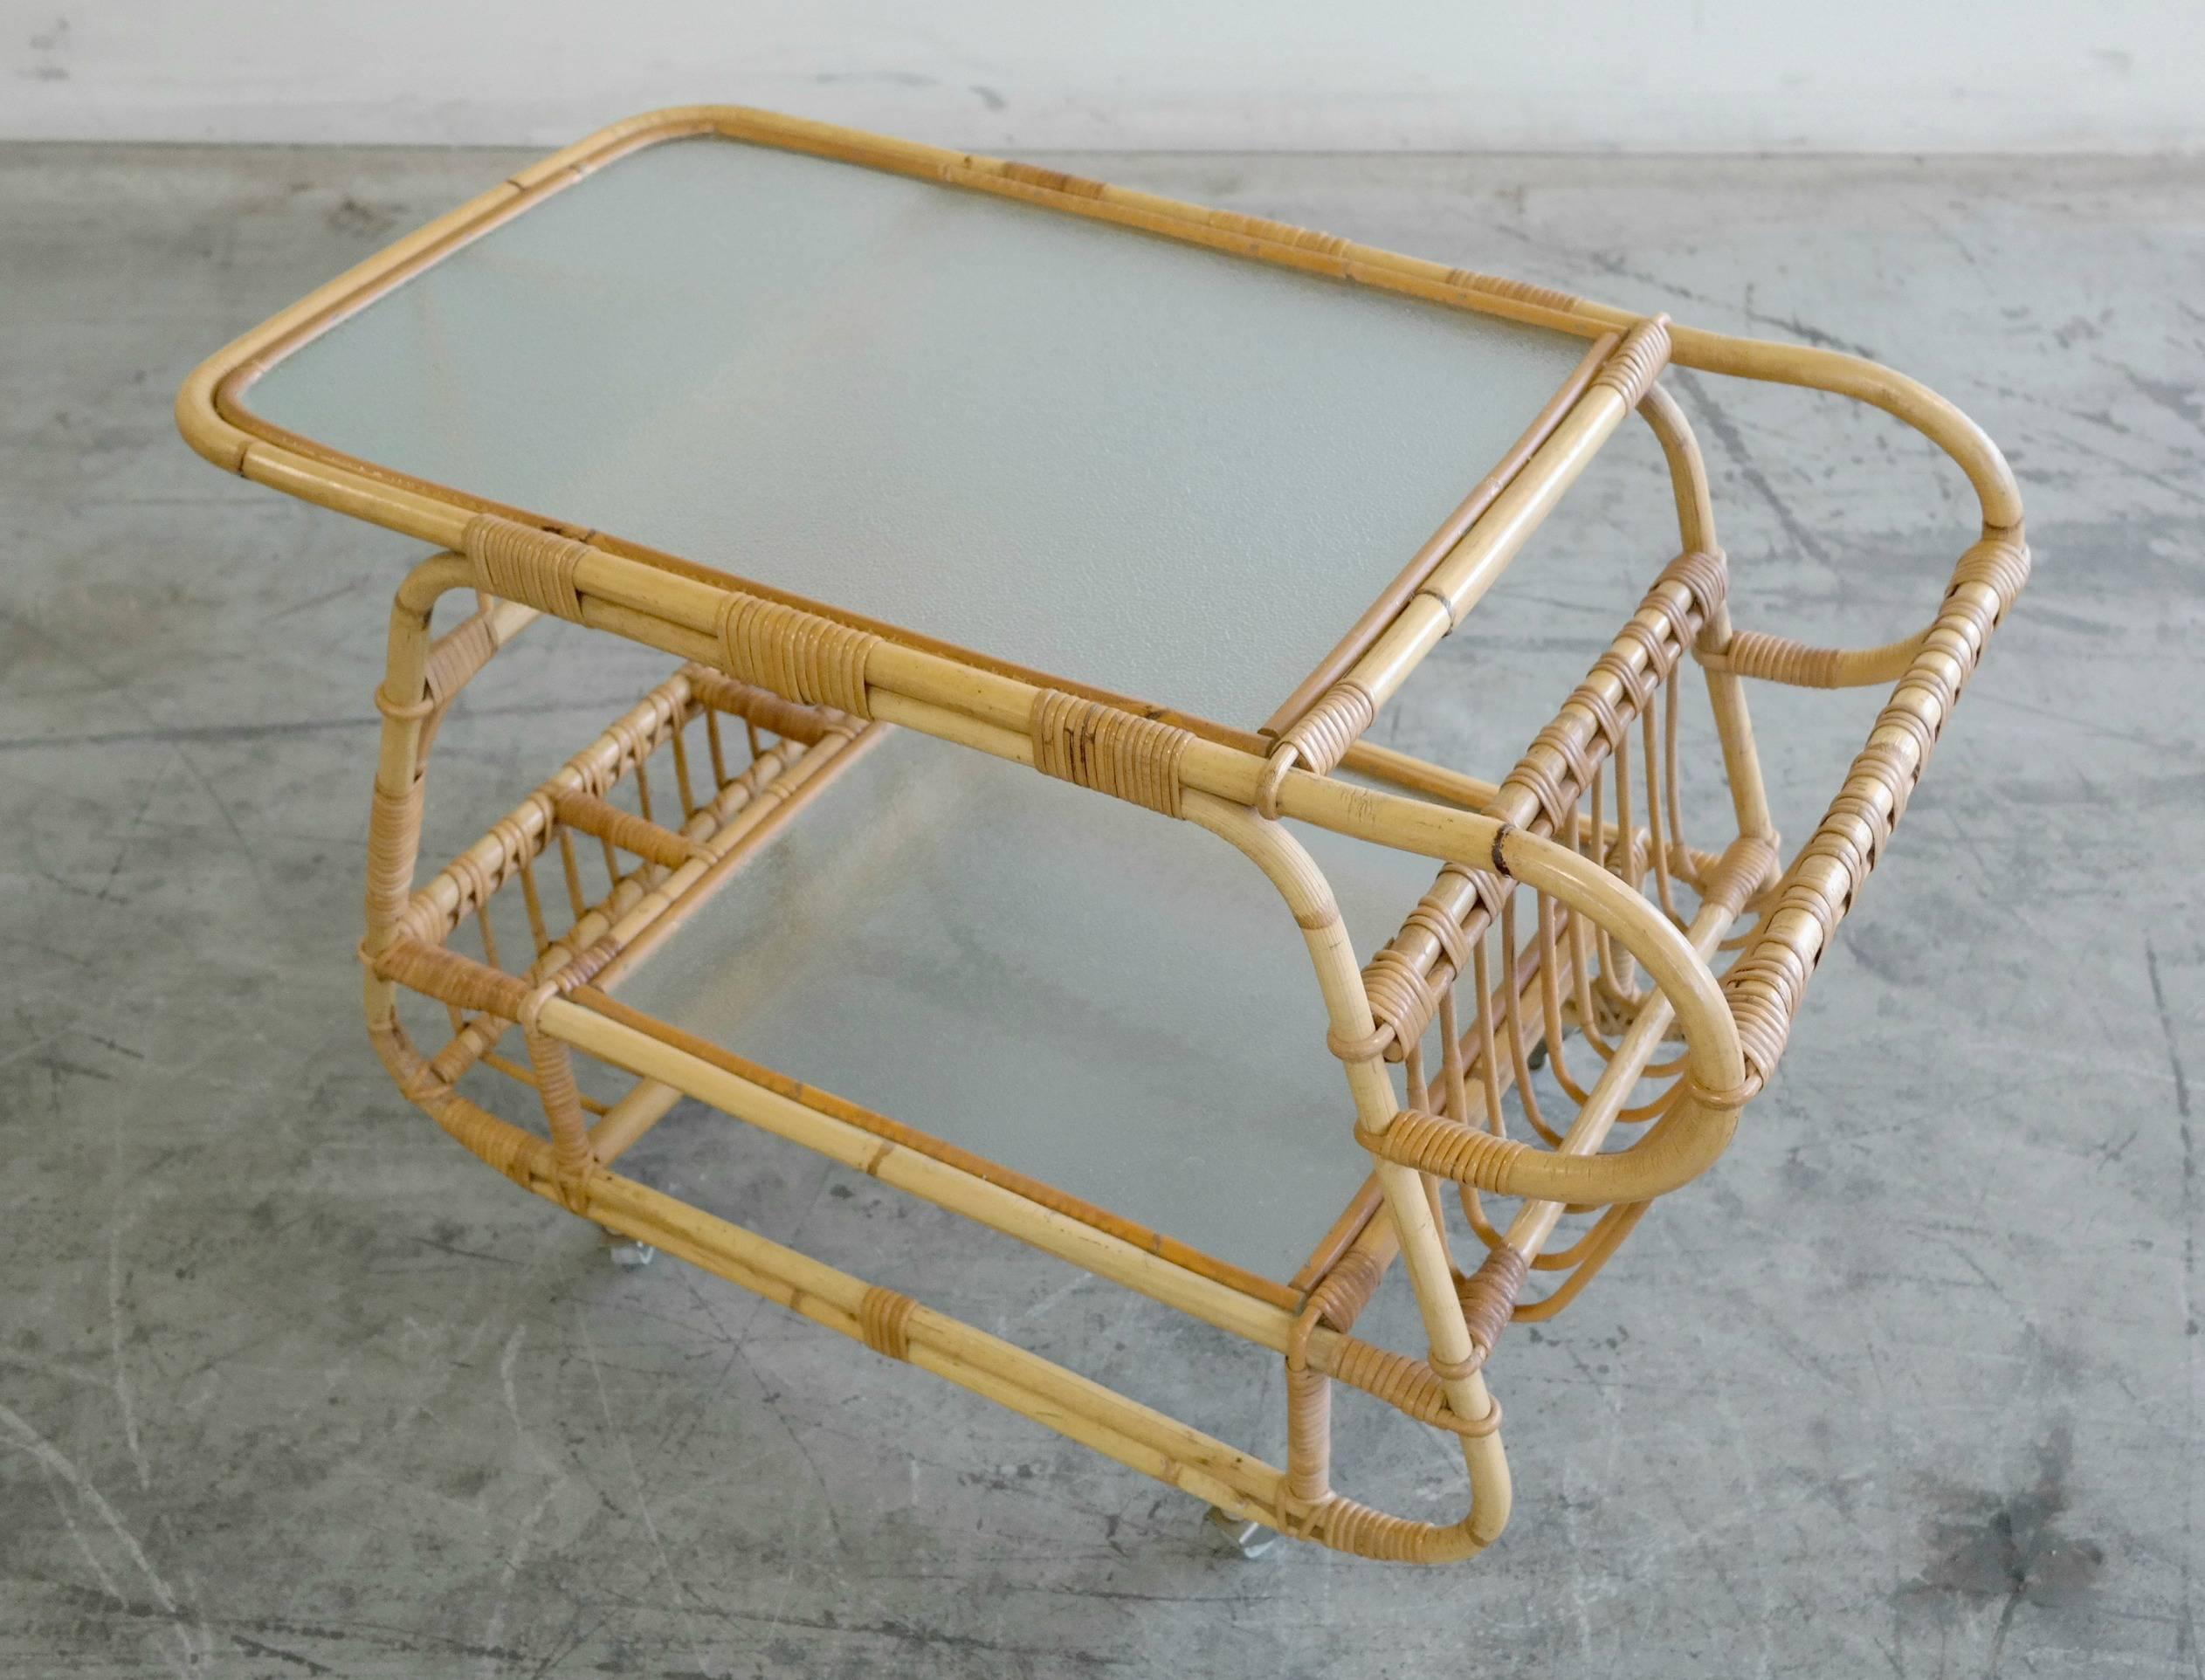 This is a beautiful Mid-Century rattan bar cart. Has a rack for magazines and a frosted glass top as well as frosted glass bottom tray and extra compartments for additional storage. Great design and style. In great shape with no cracks on the glass.